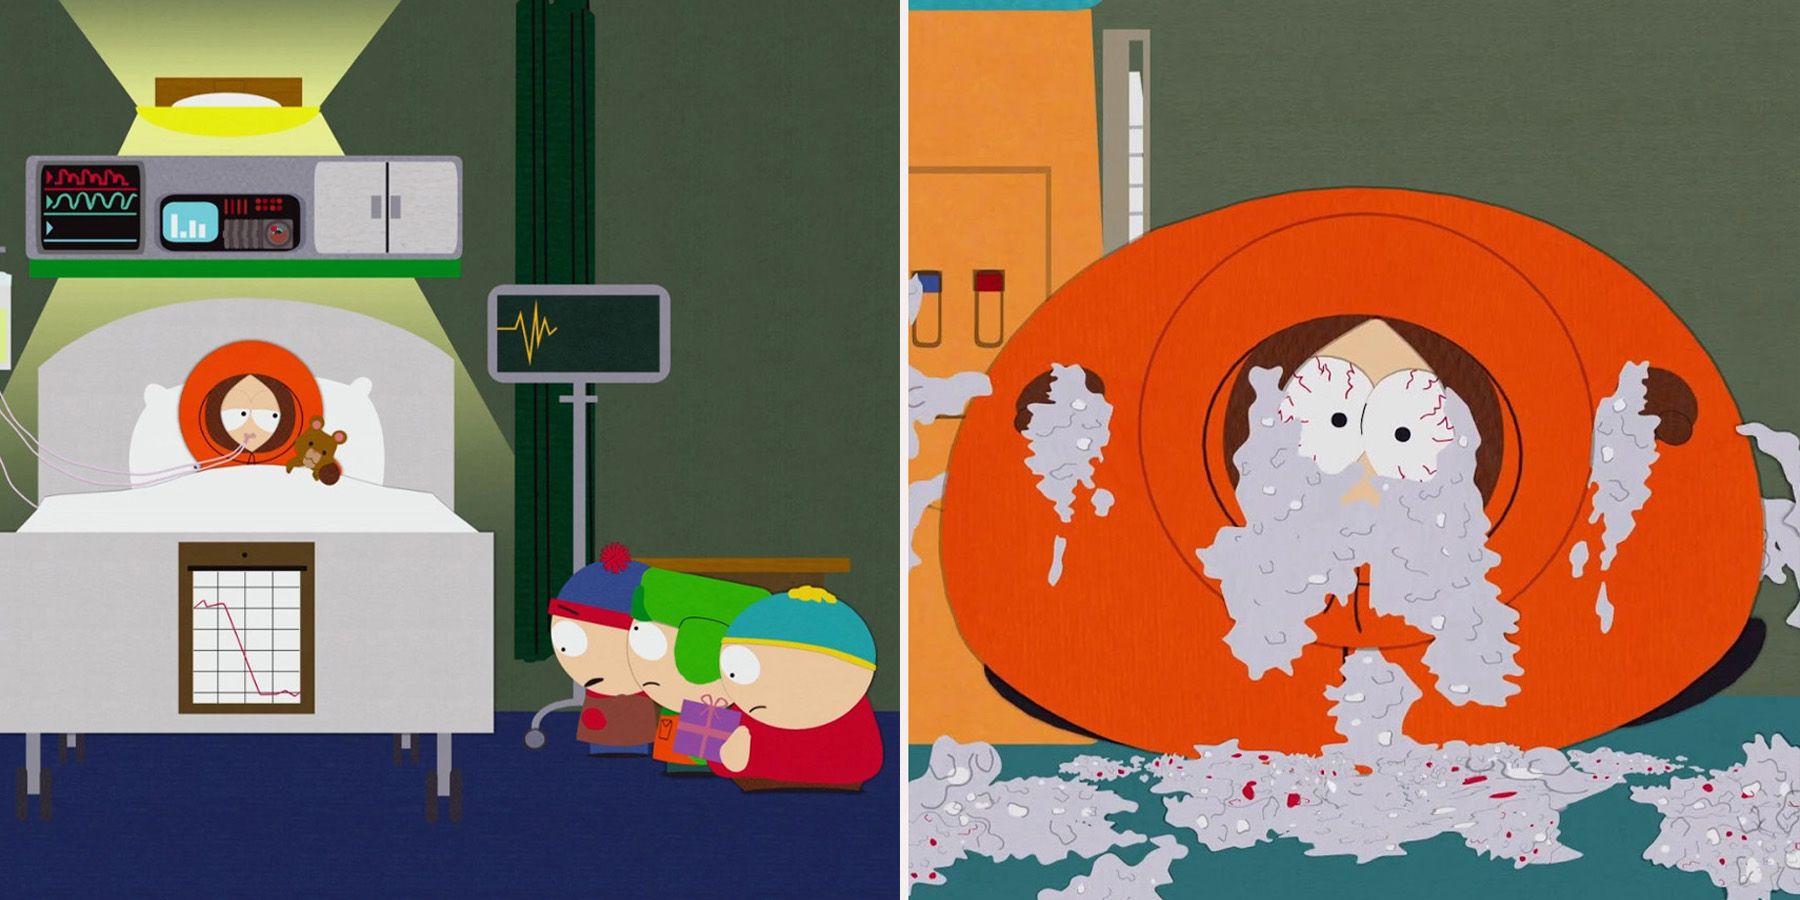 Top 10 South Park Characters  Who Makes the Cut? Kenny, Chef